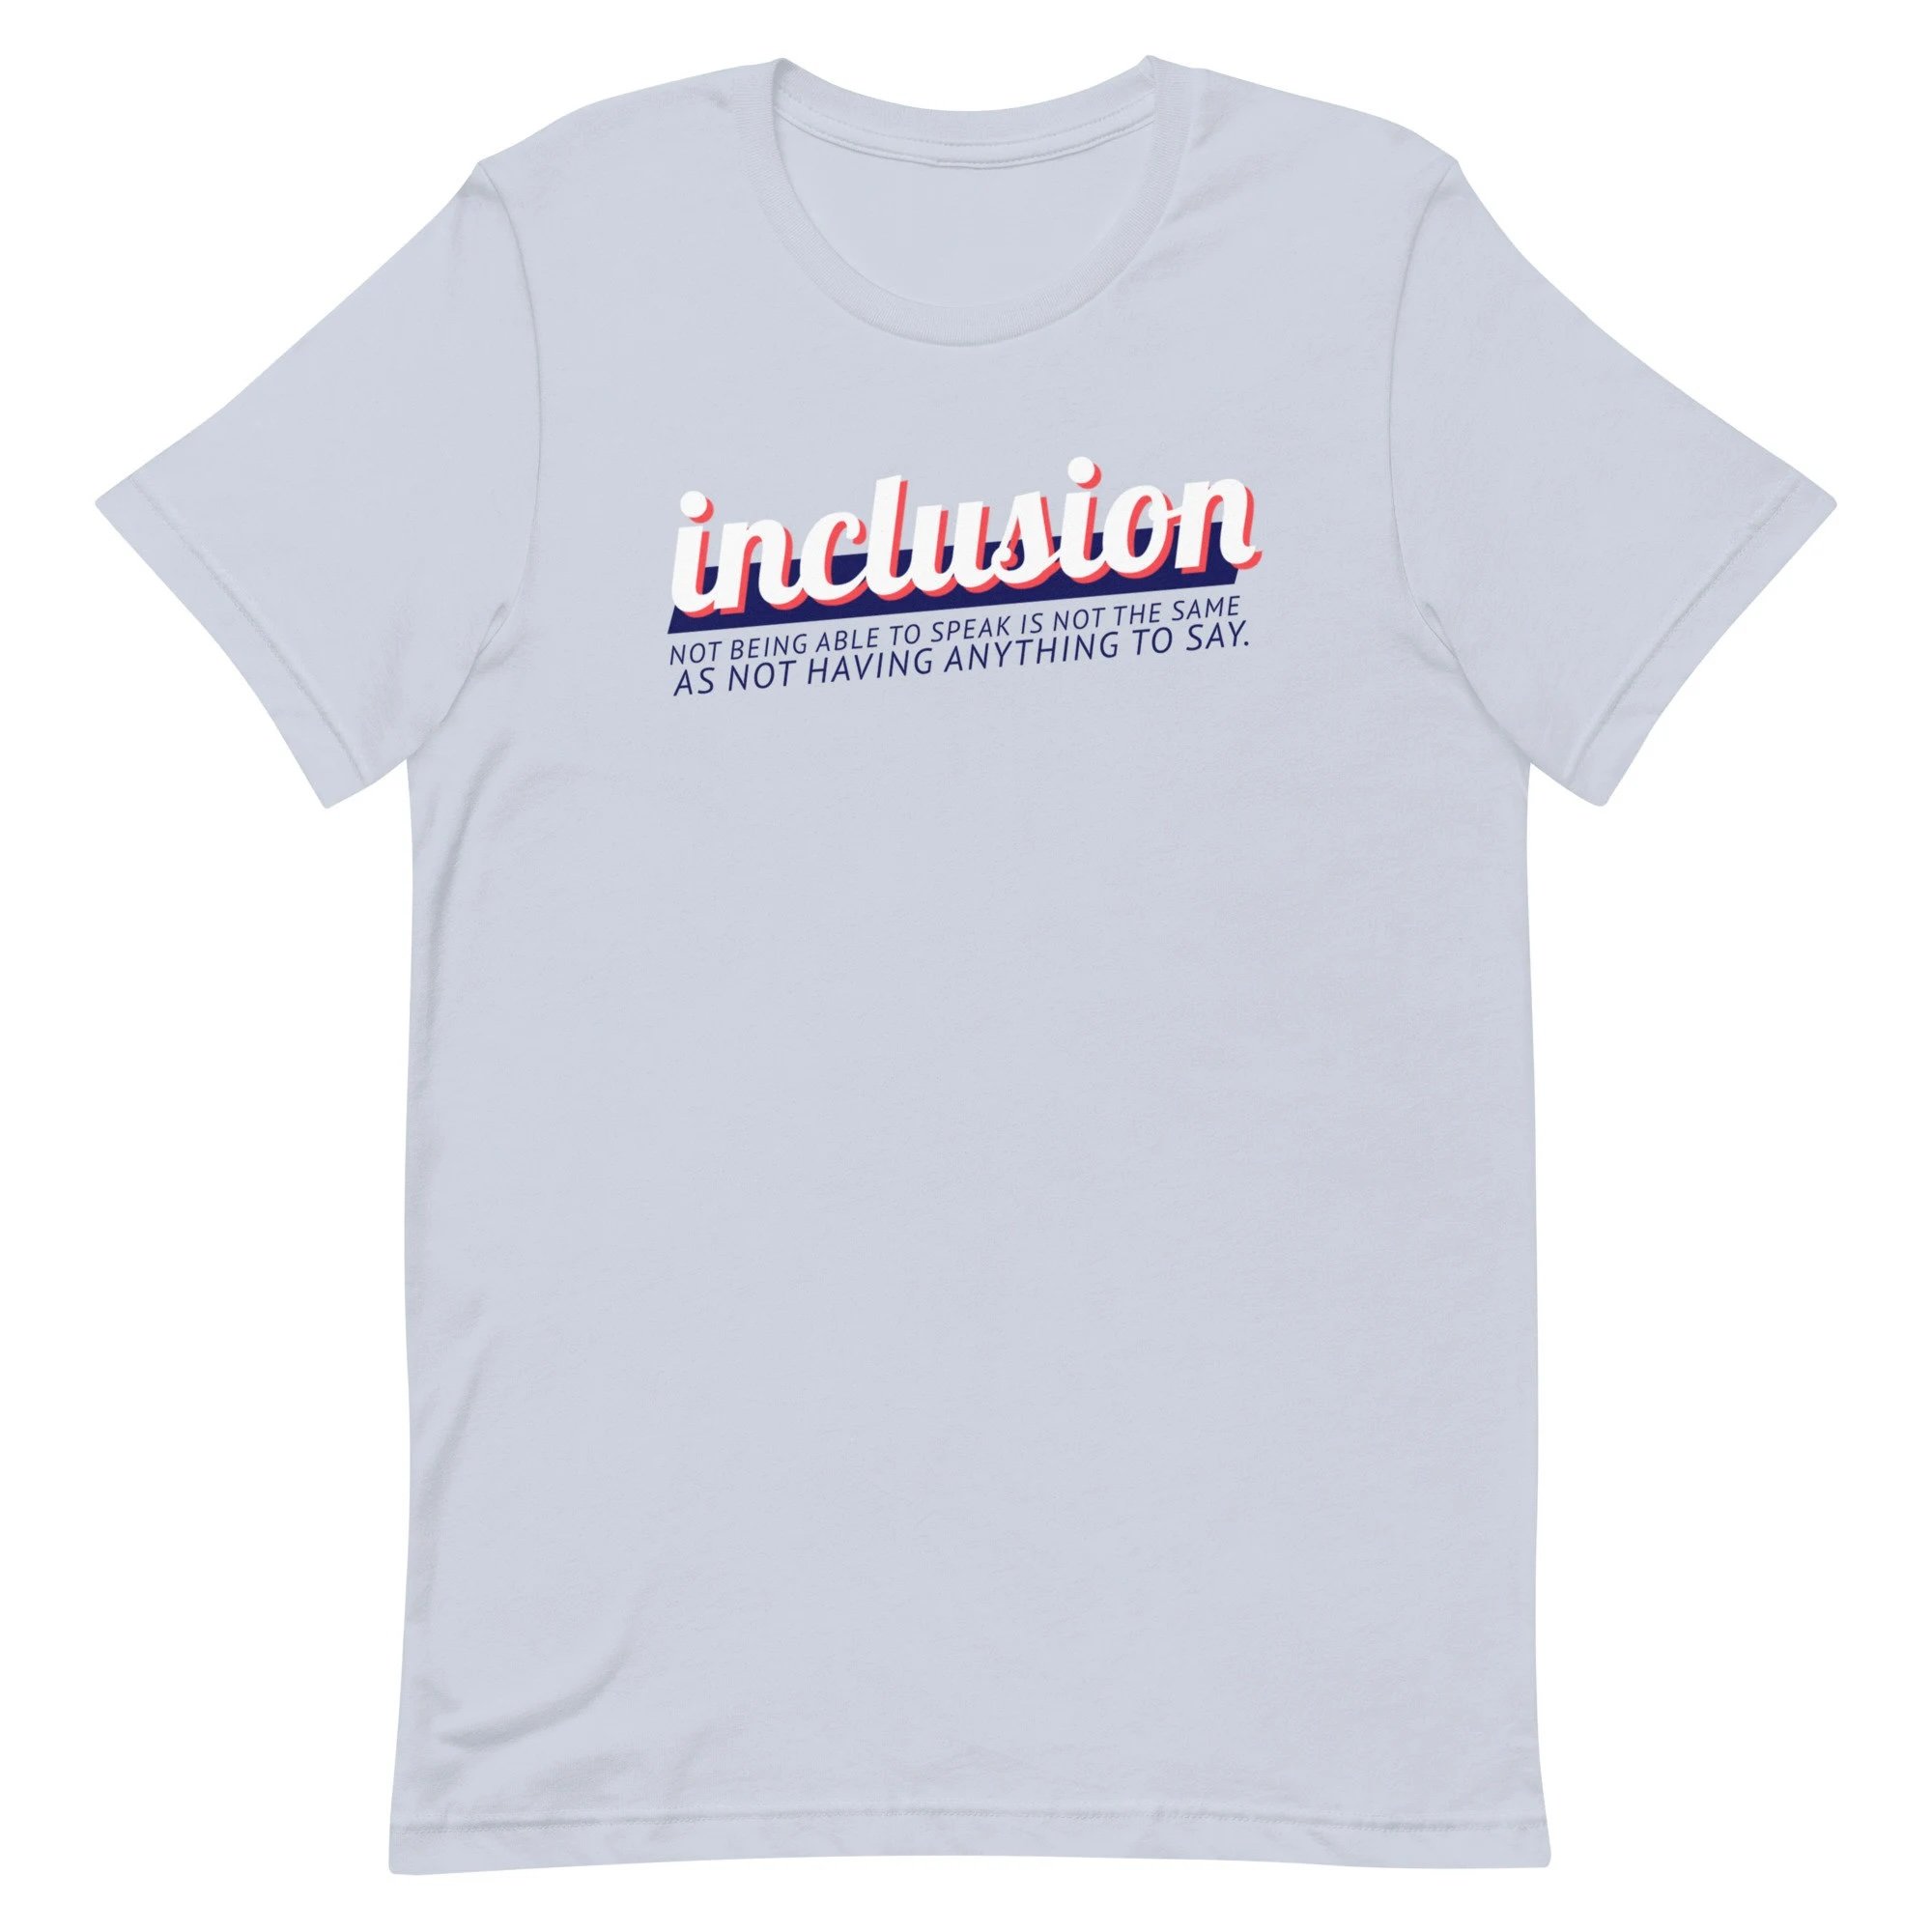 disability inclusion short-sleeved unisex t-shirt